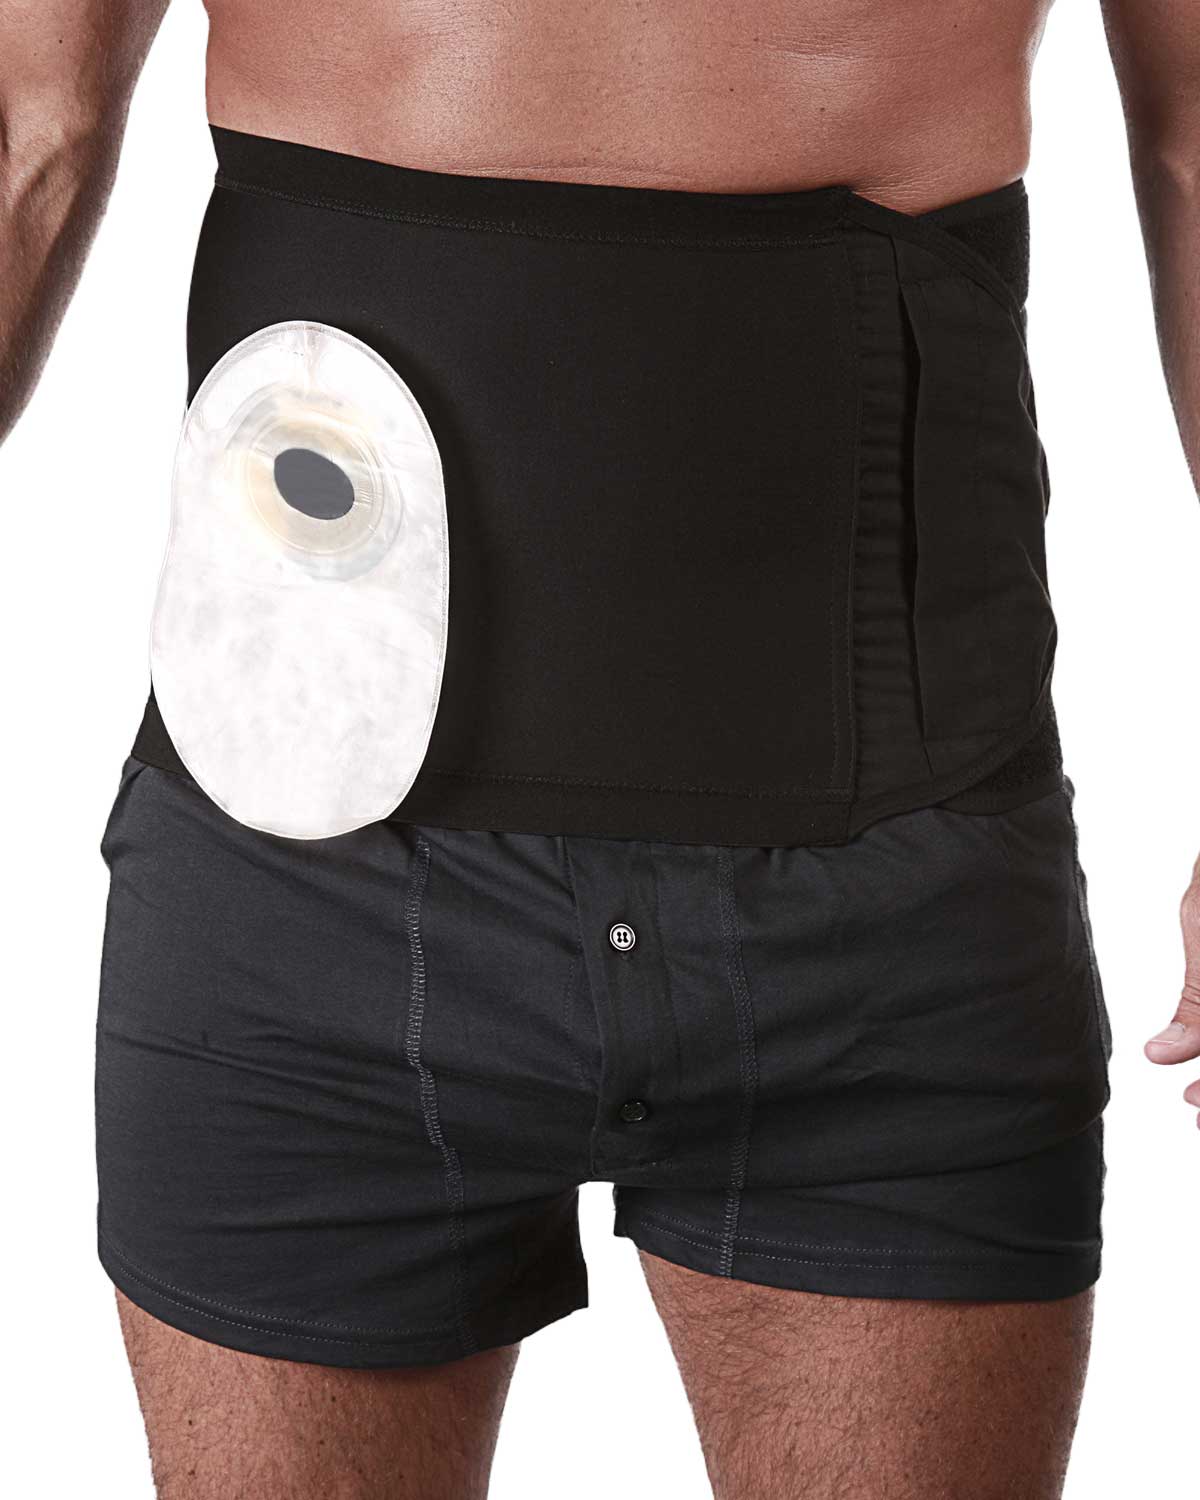 Actimove Hernia Support Brief DISCOUNT SALE - FREE Shipping